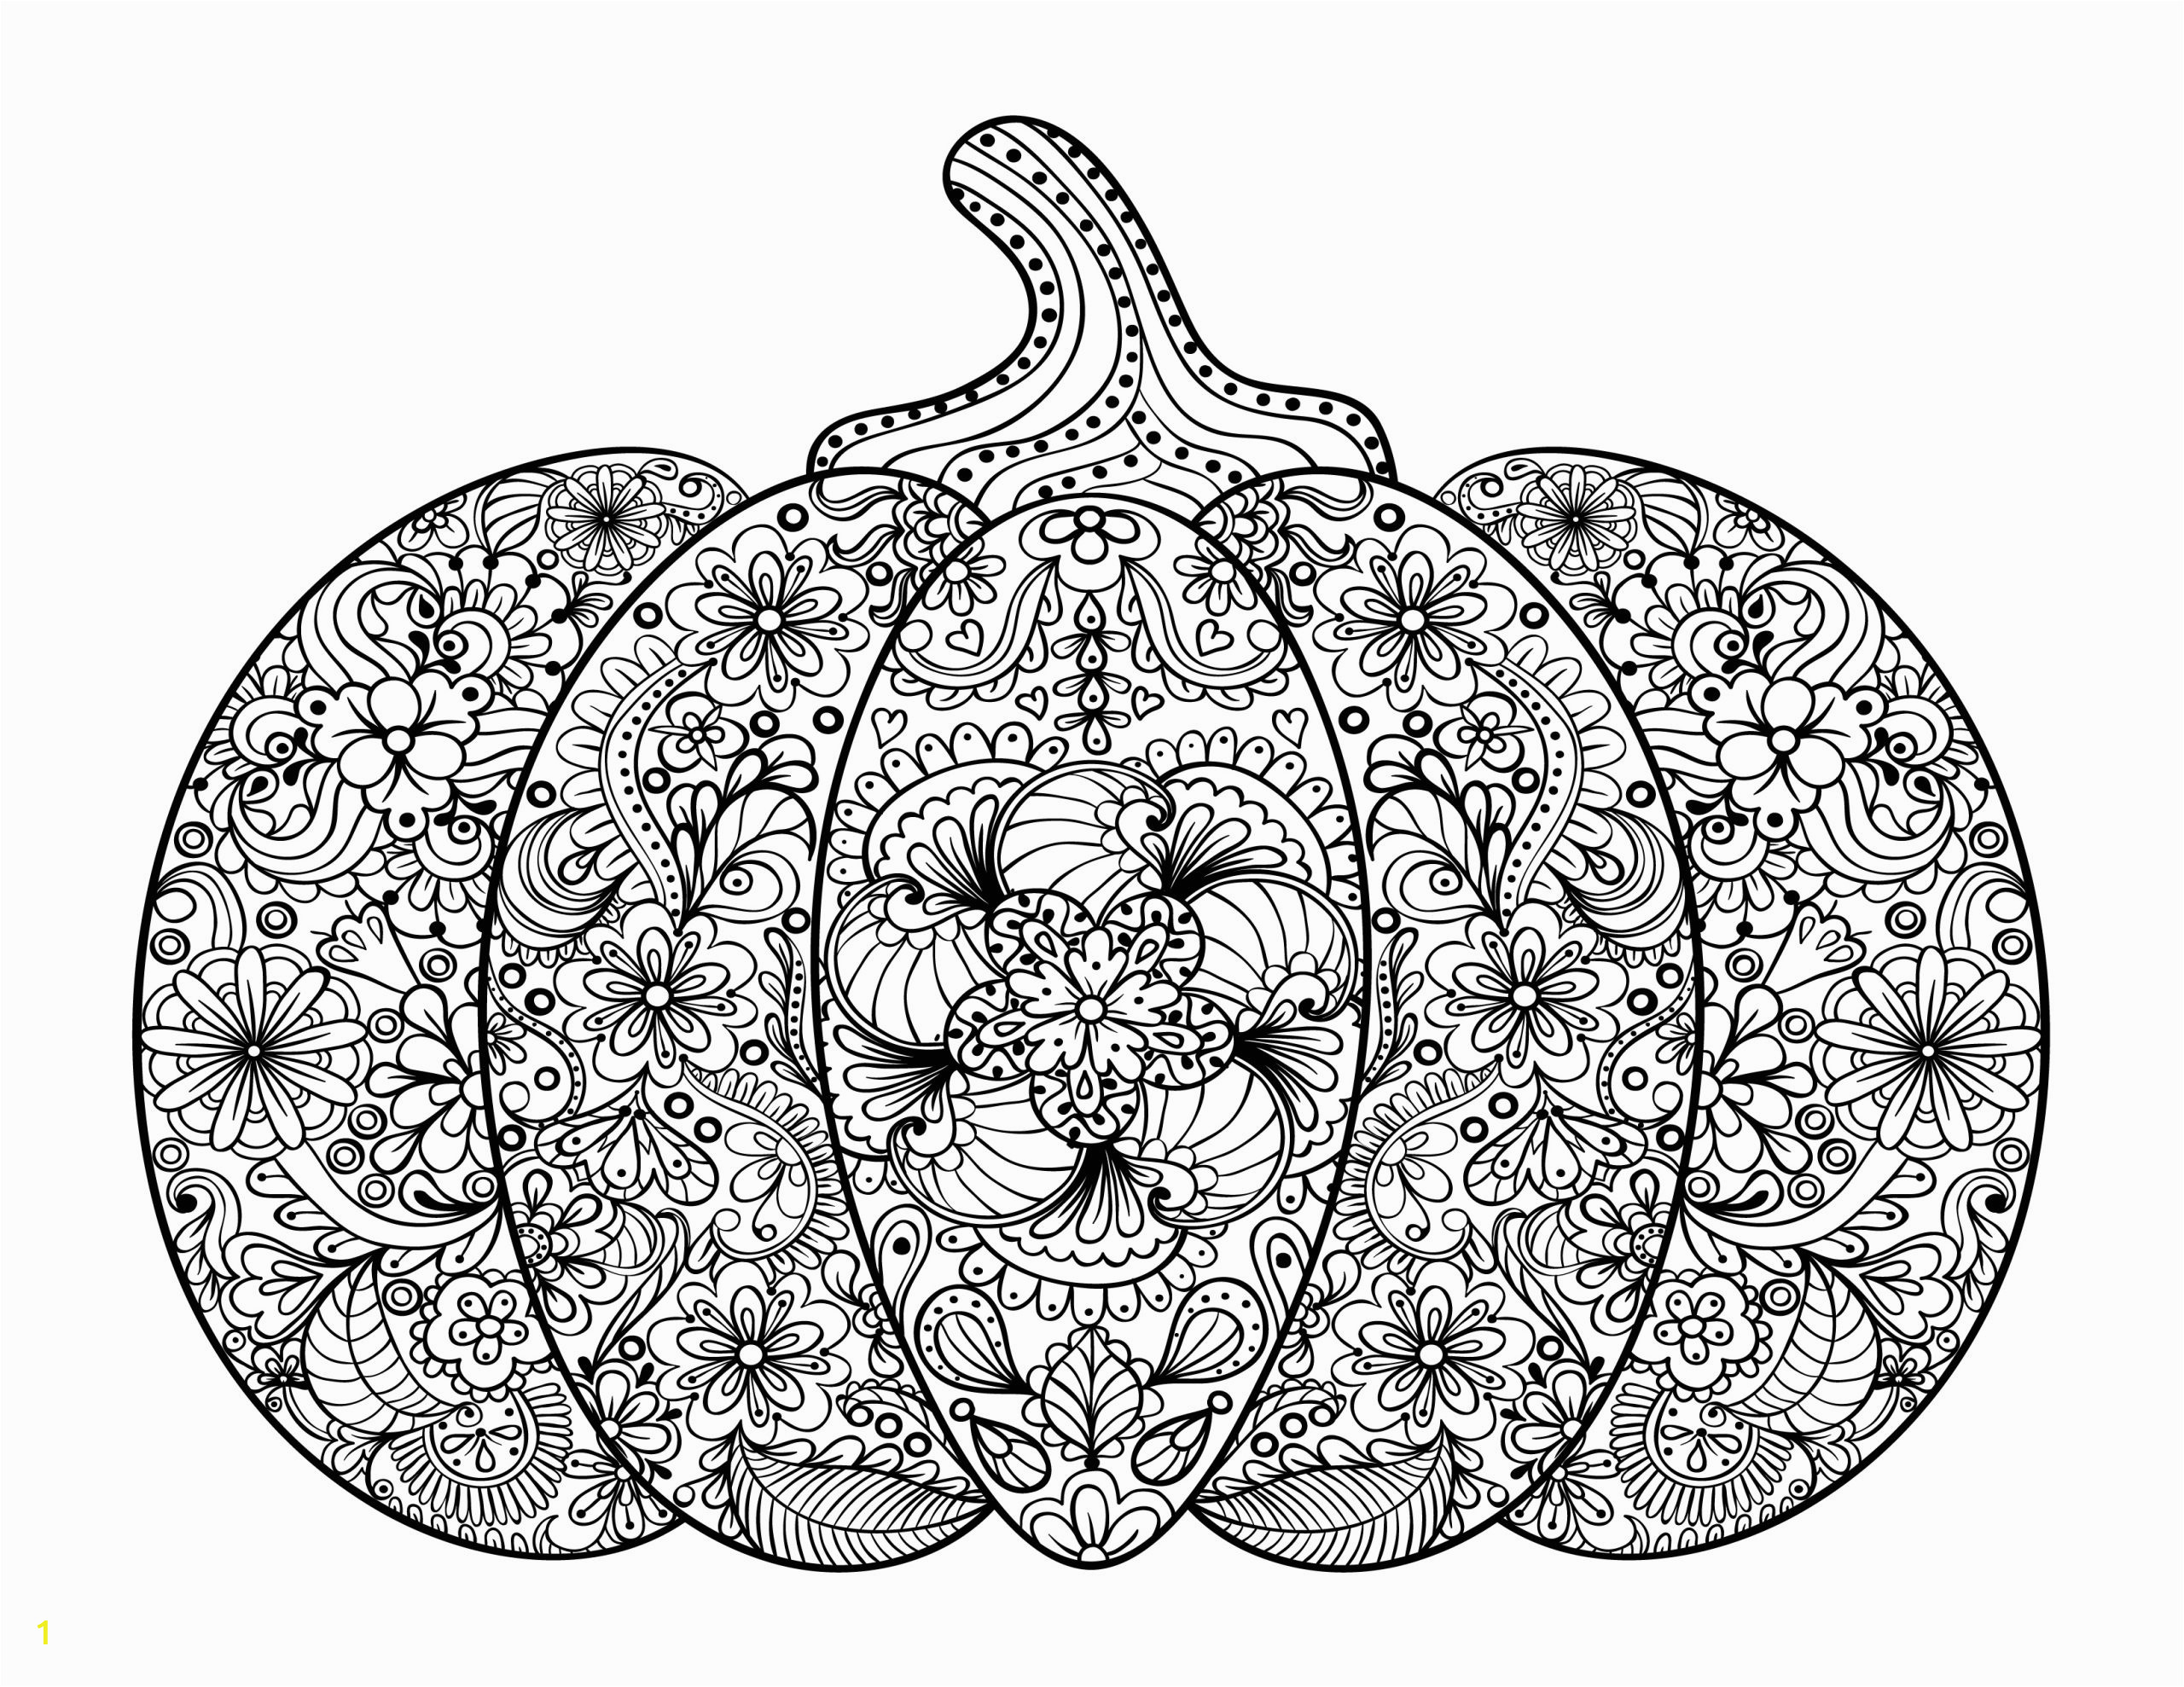 Johanna Basford Coloring Pages Coloring Books Adult Coloring Sheets Johanna Basford